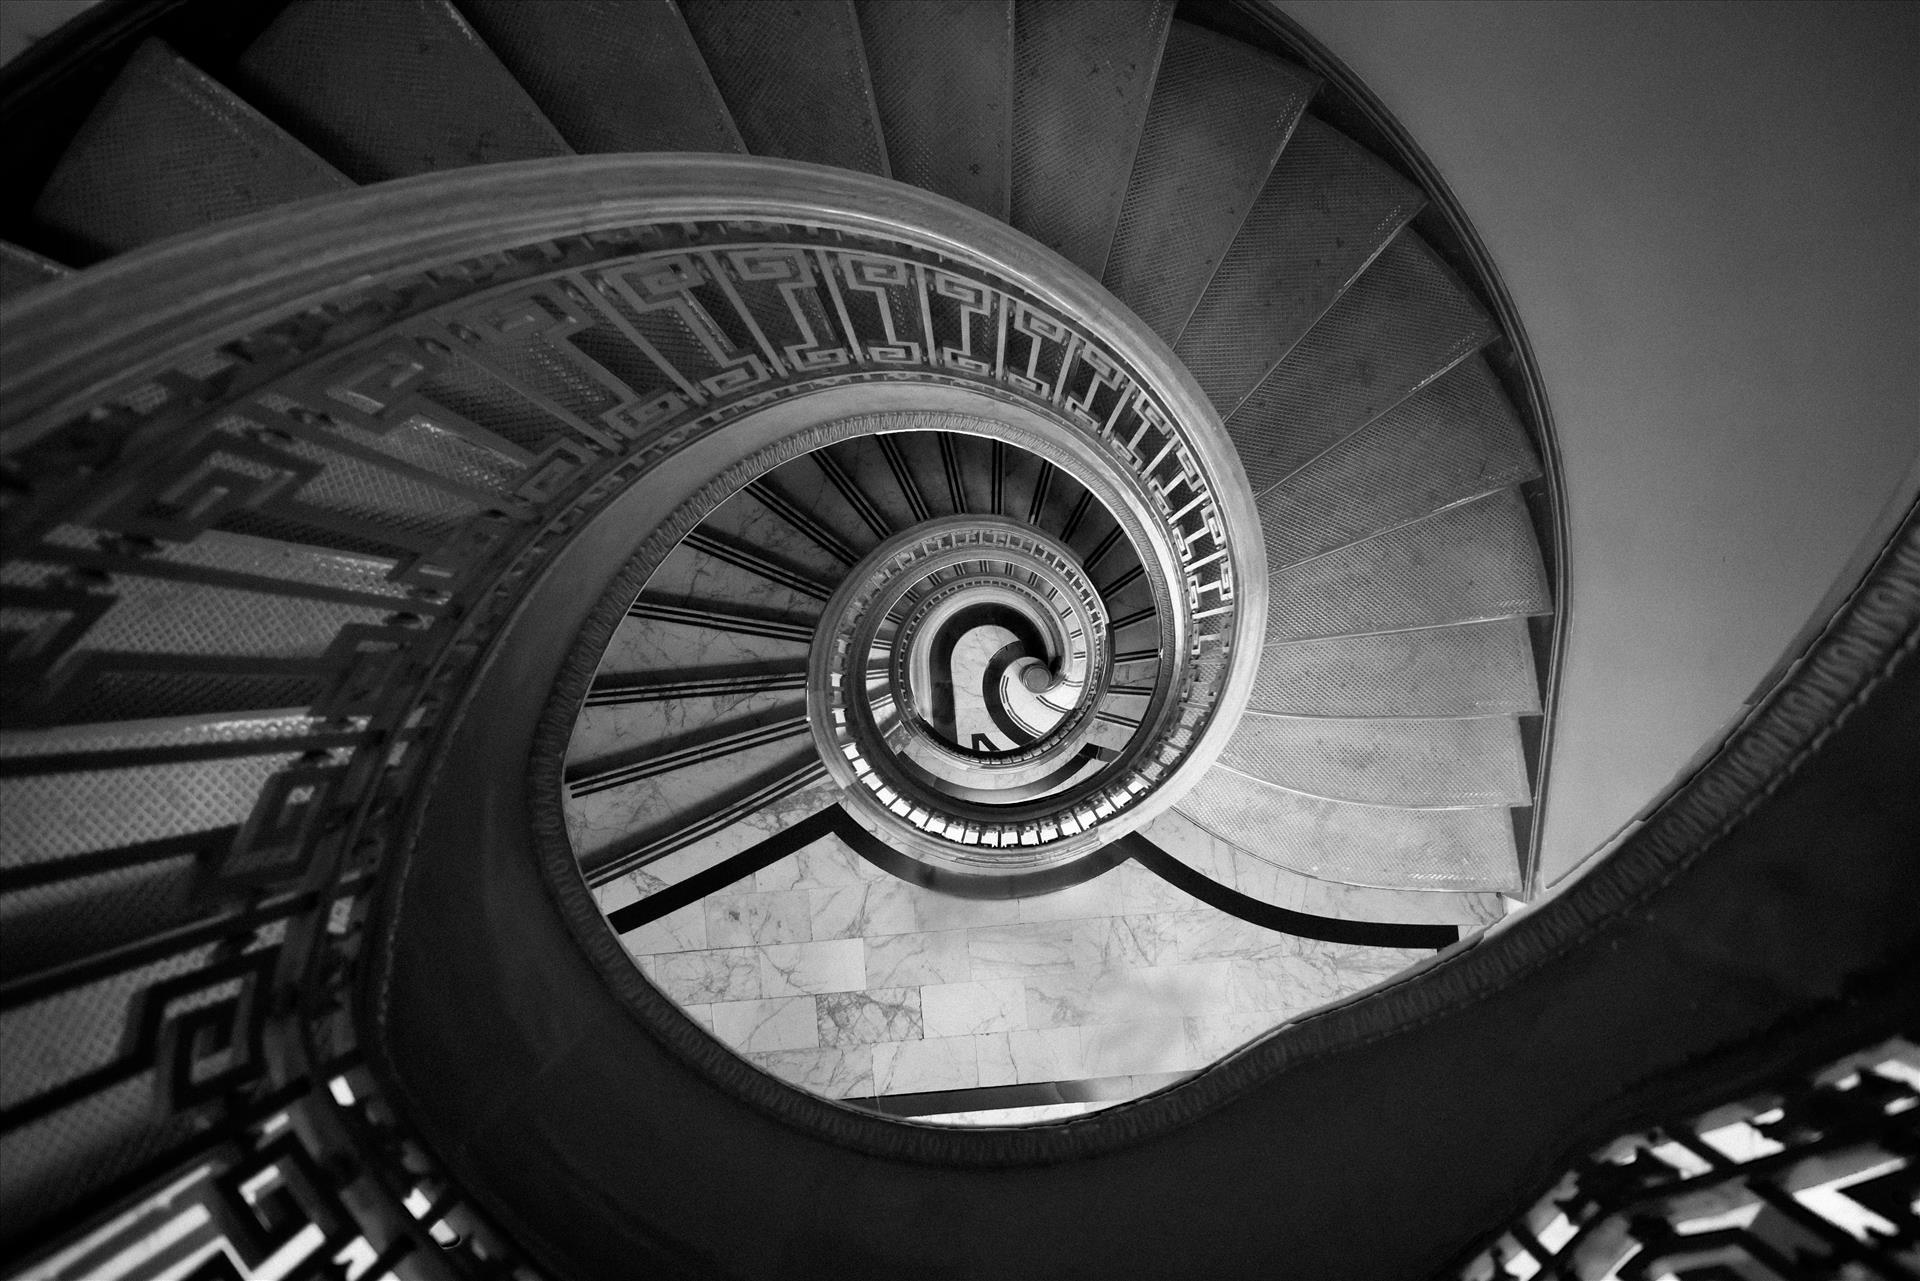 Spiral staircase symbolizing the questions of the sales funnel